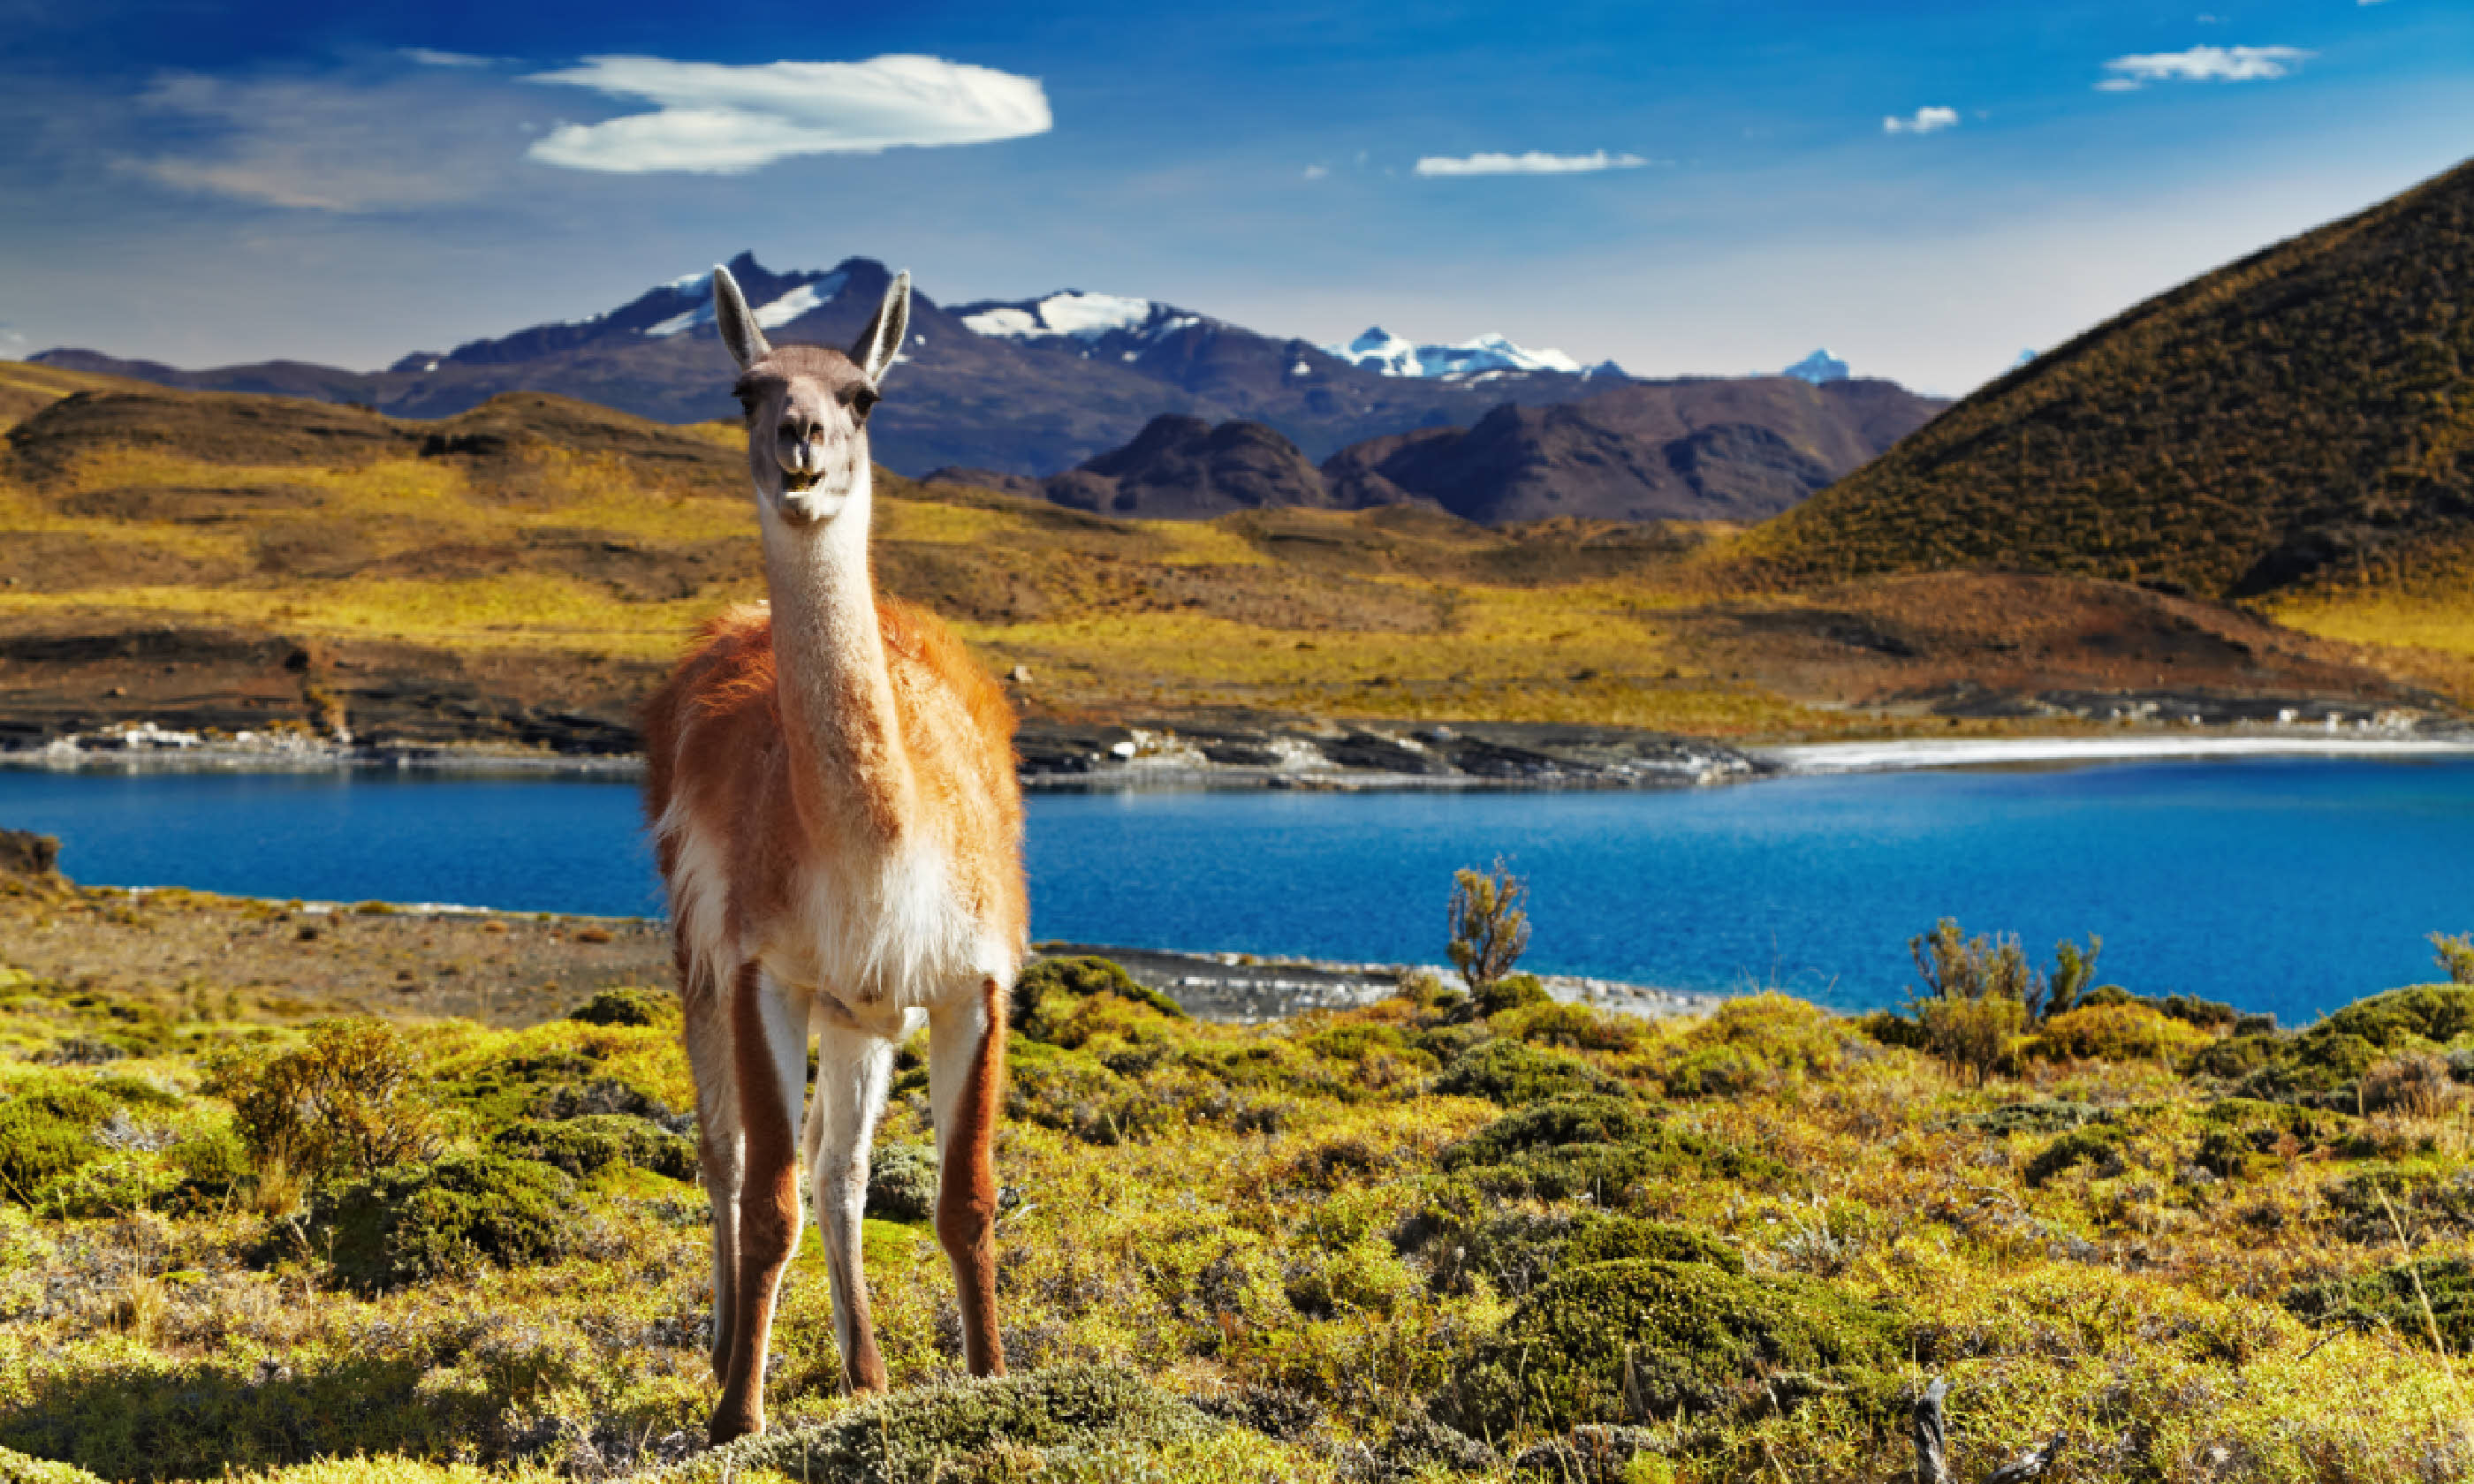 Guanaco in Torres del Paine National Park, Chile (Shutterstock)